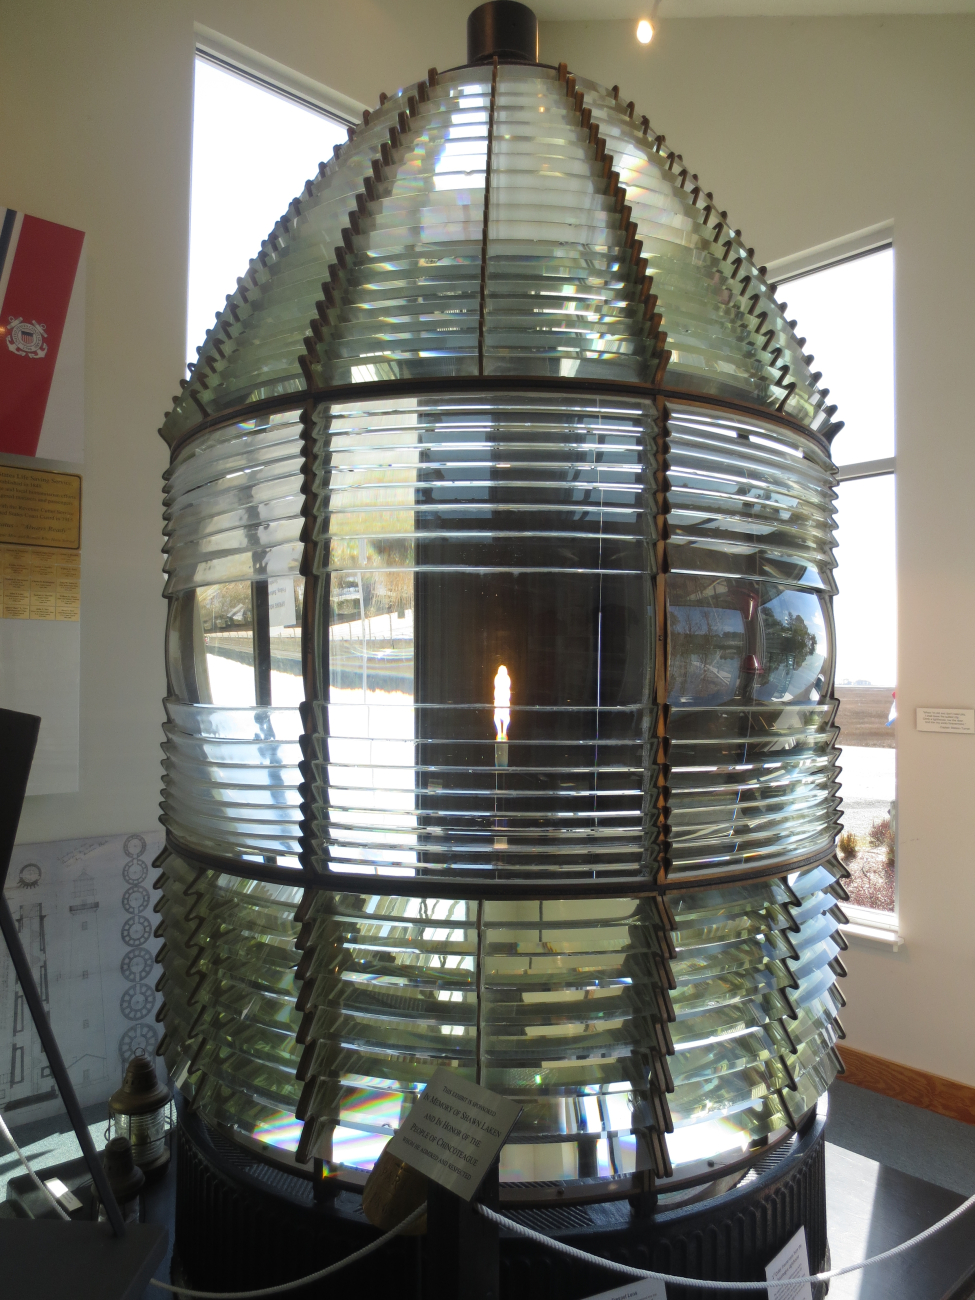 The first-order Fresnel Lens that graced Assateague Lighthouse from 1867-1961